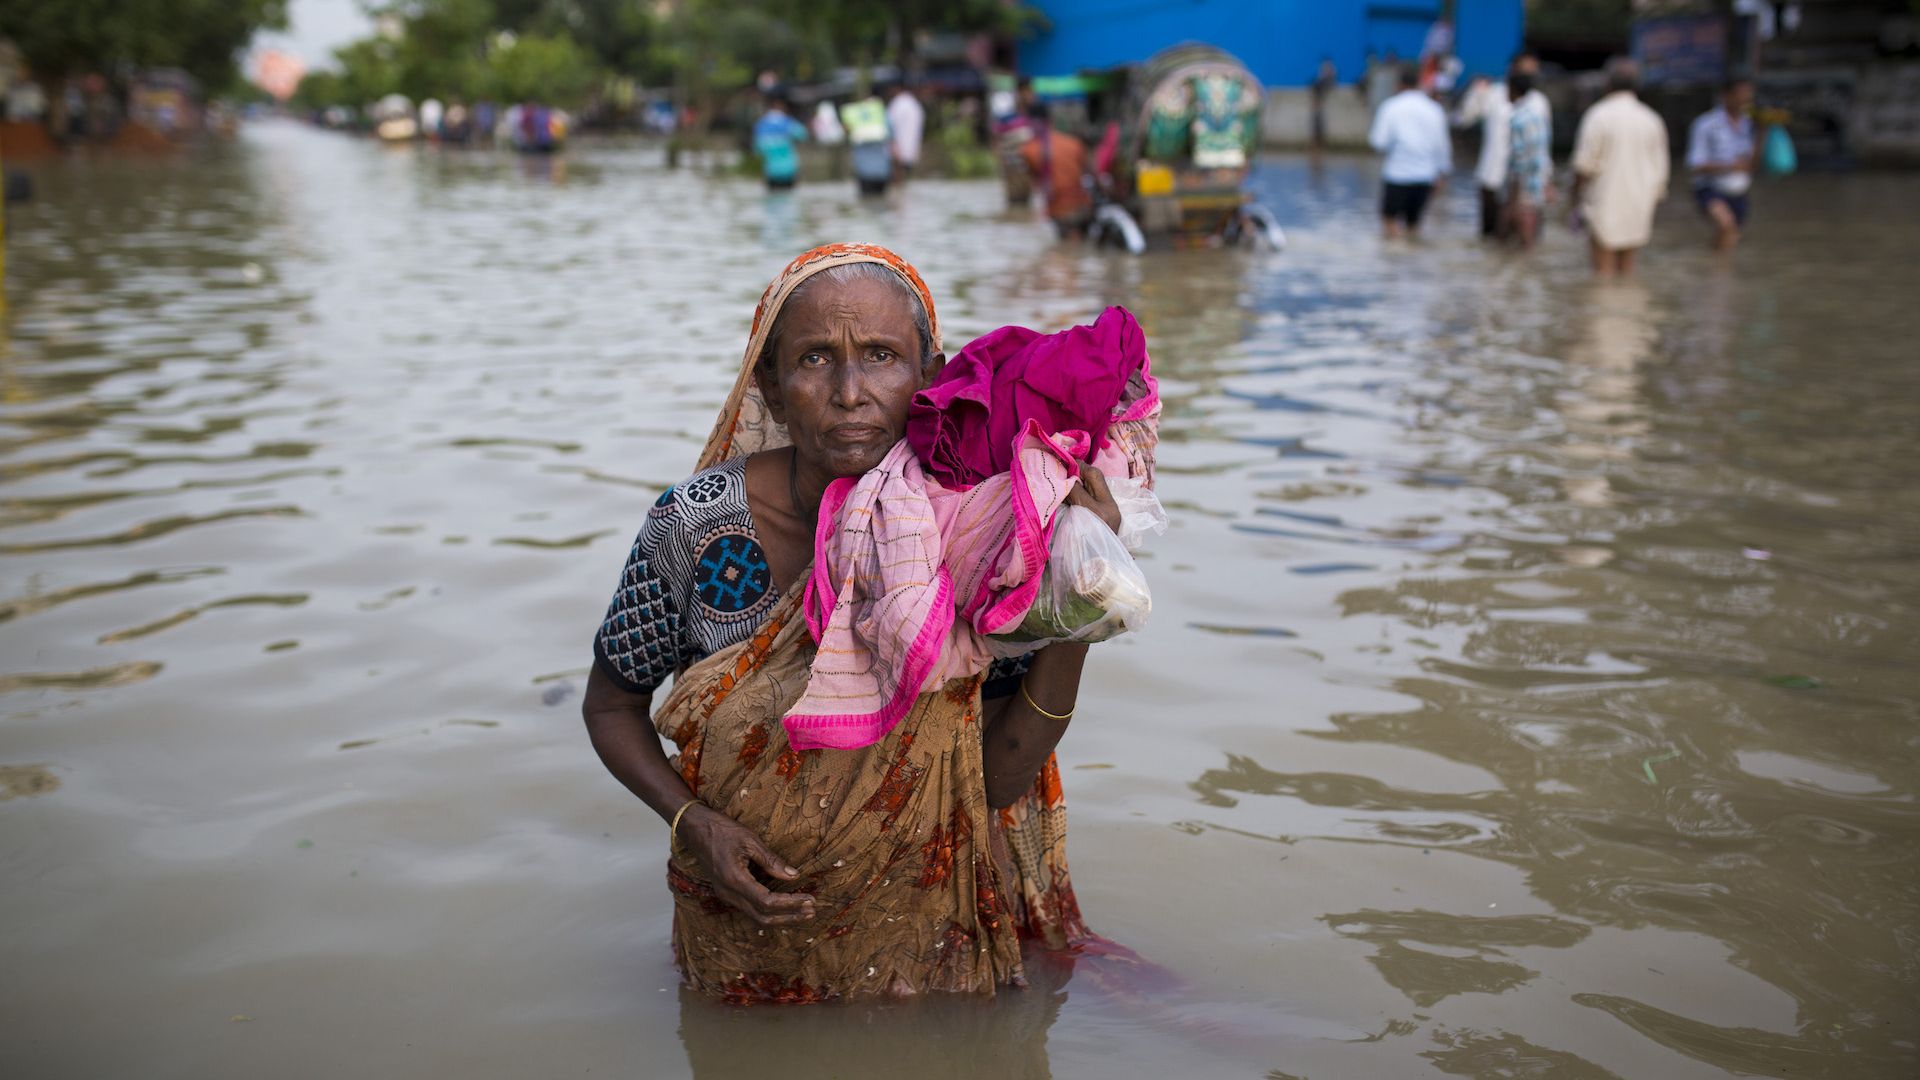 Sea level rise in Bangladesh will be more severe under a 2-degree scenario, as shown in a new U.N. IPCC report.